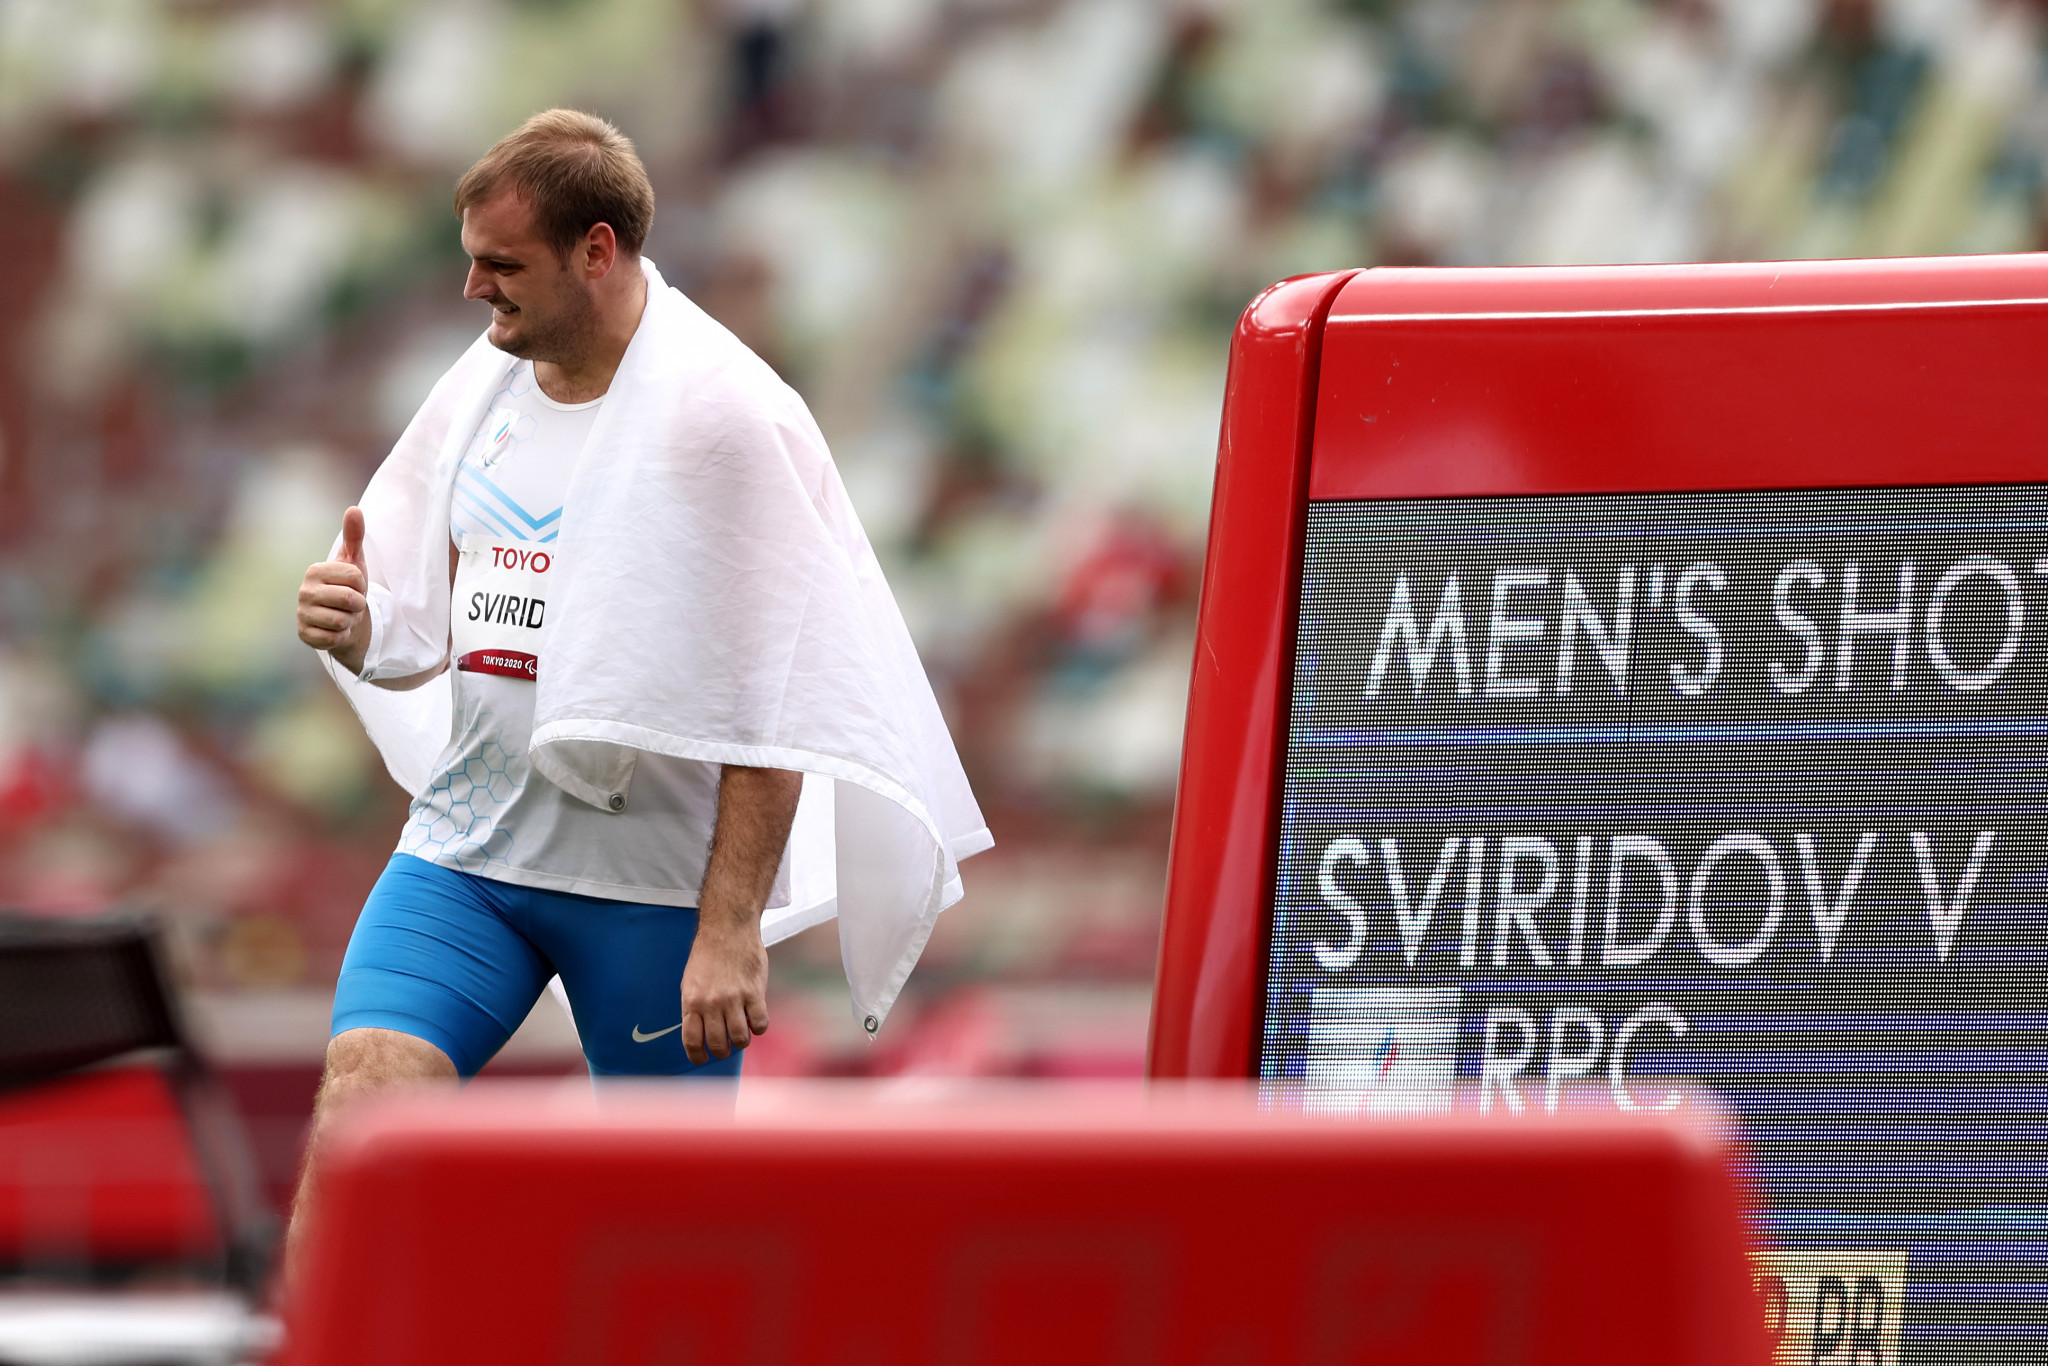 Vladimir Sviridov twice broke his own world record in the men's F36 shot put final, recording throws of 16.45m and then 16.67m ©Getty Images